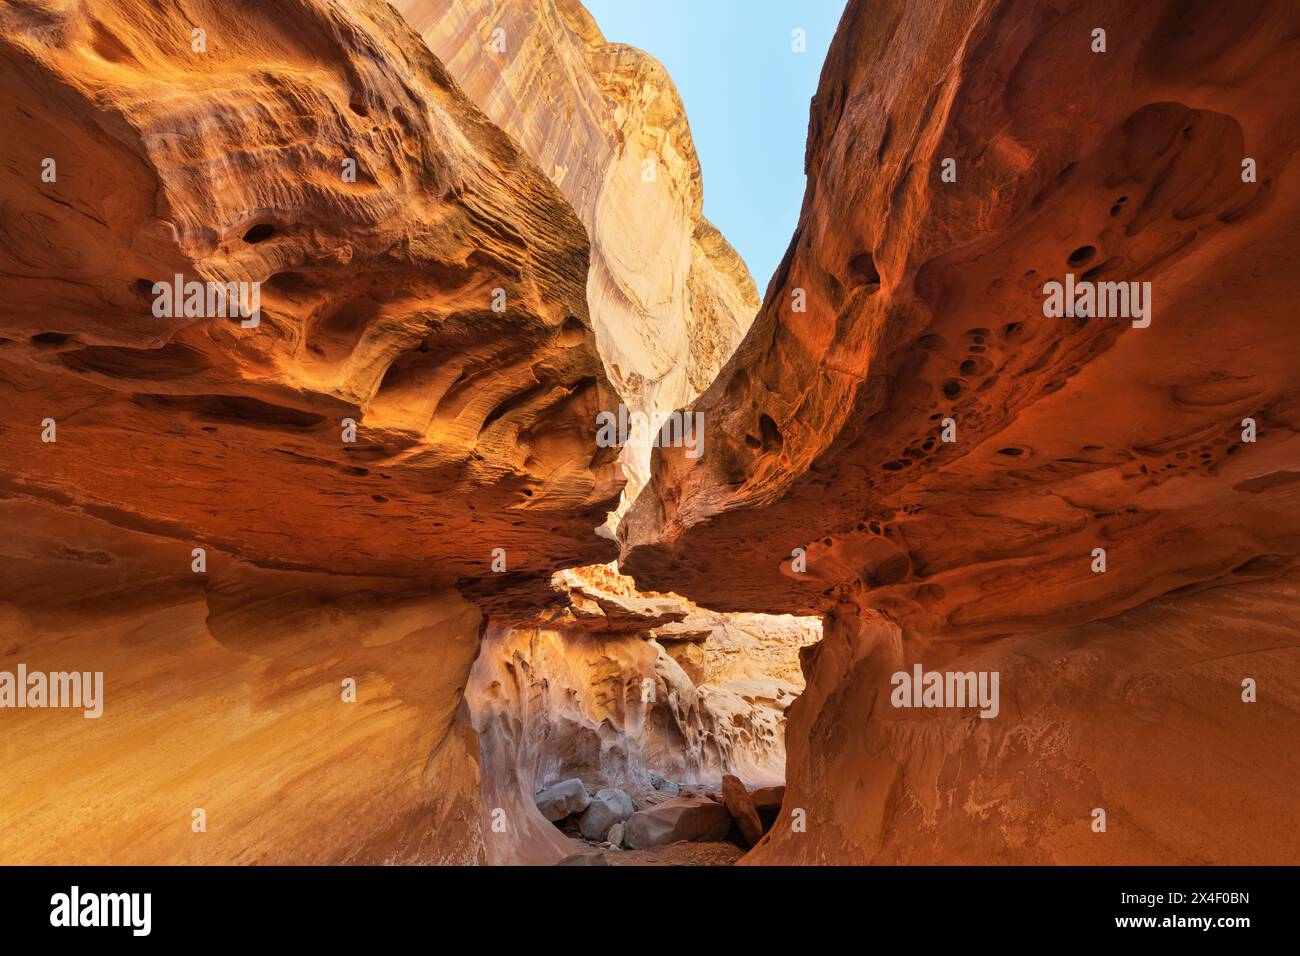 Eroded sandstone walls and overhangs resembling Swiss Cheese in The Subway slot portion of Crack Canyon, San Rafael Reef, Utah. Stock Photo